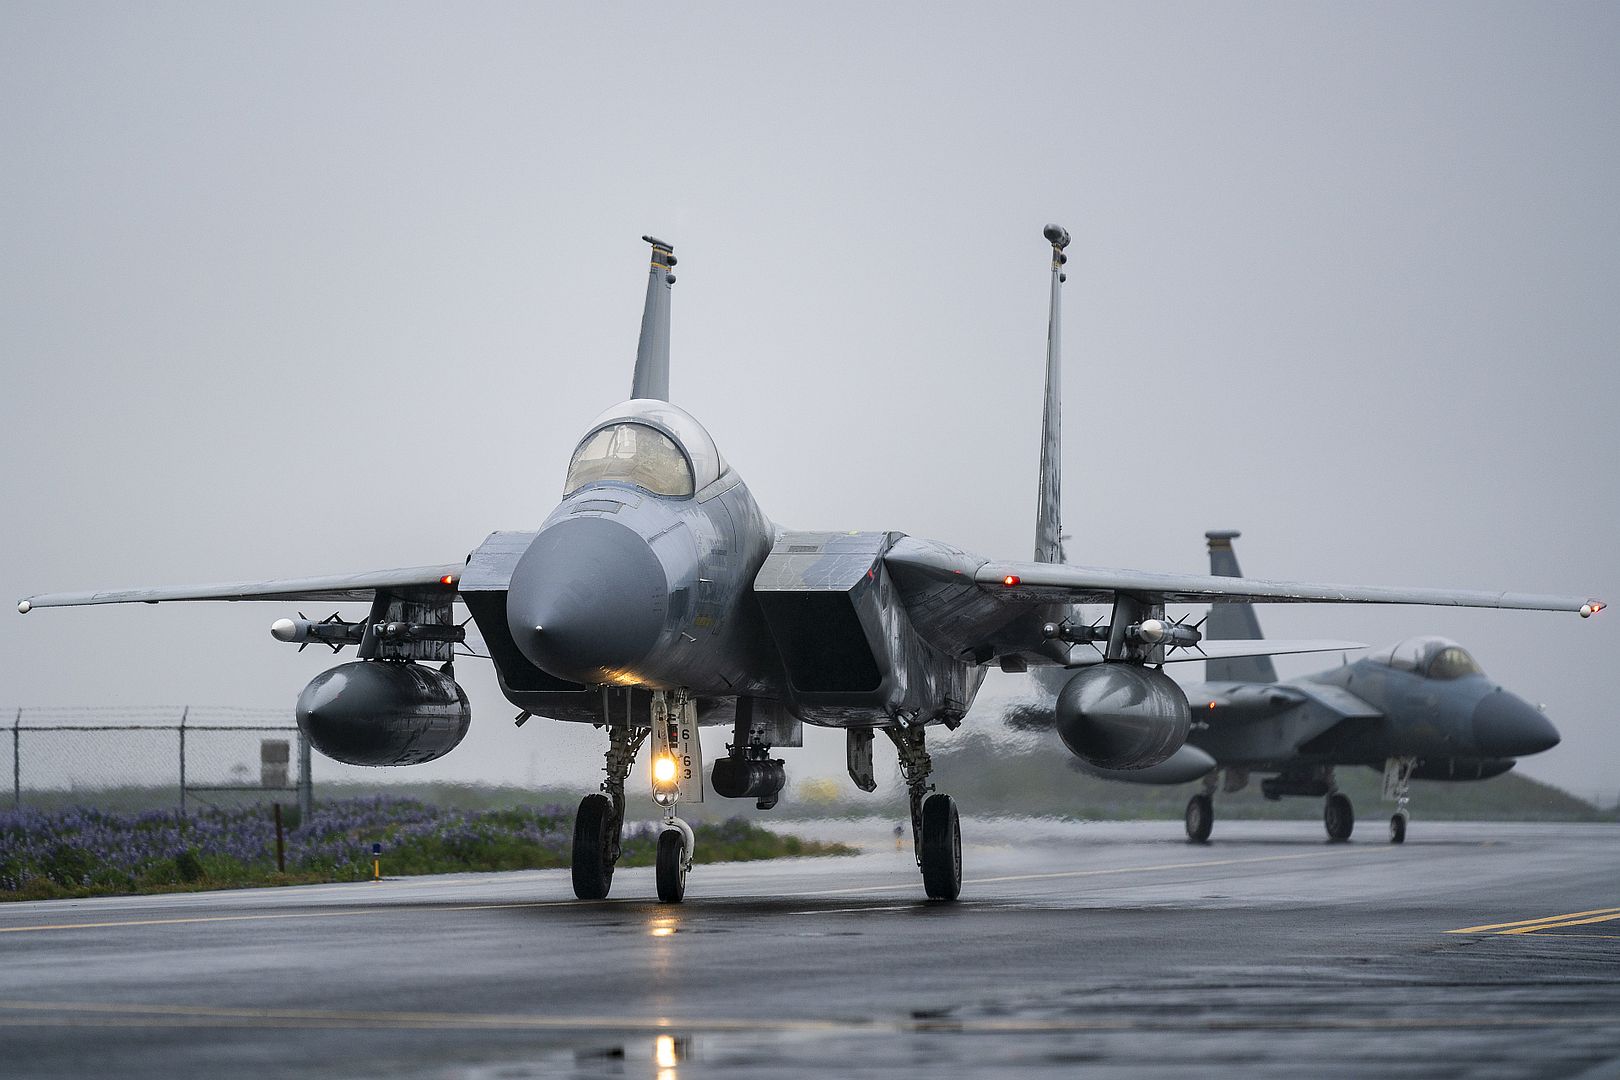 15C Eagles Assigned To The 493rd Fighter Squadron Taxi After Completing A Training Sortie In Support Of NATO Air Policing Operations At Keflavik Air Base Iceland July 9 2021